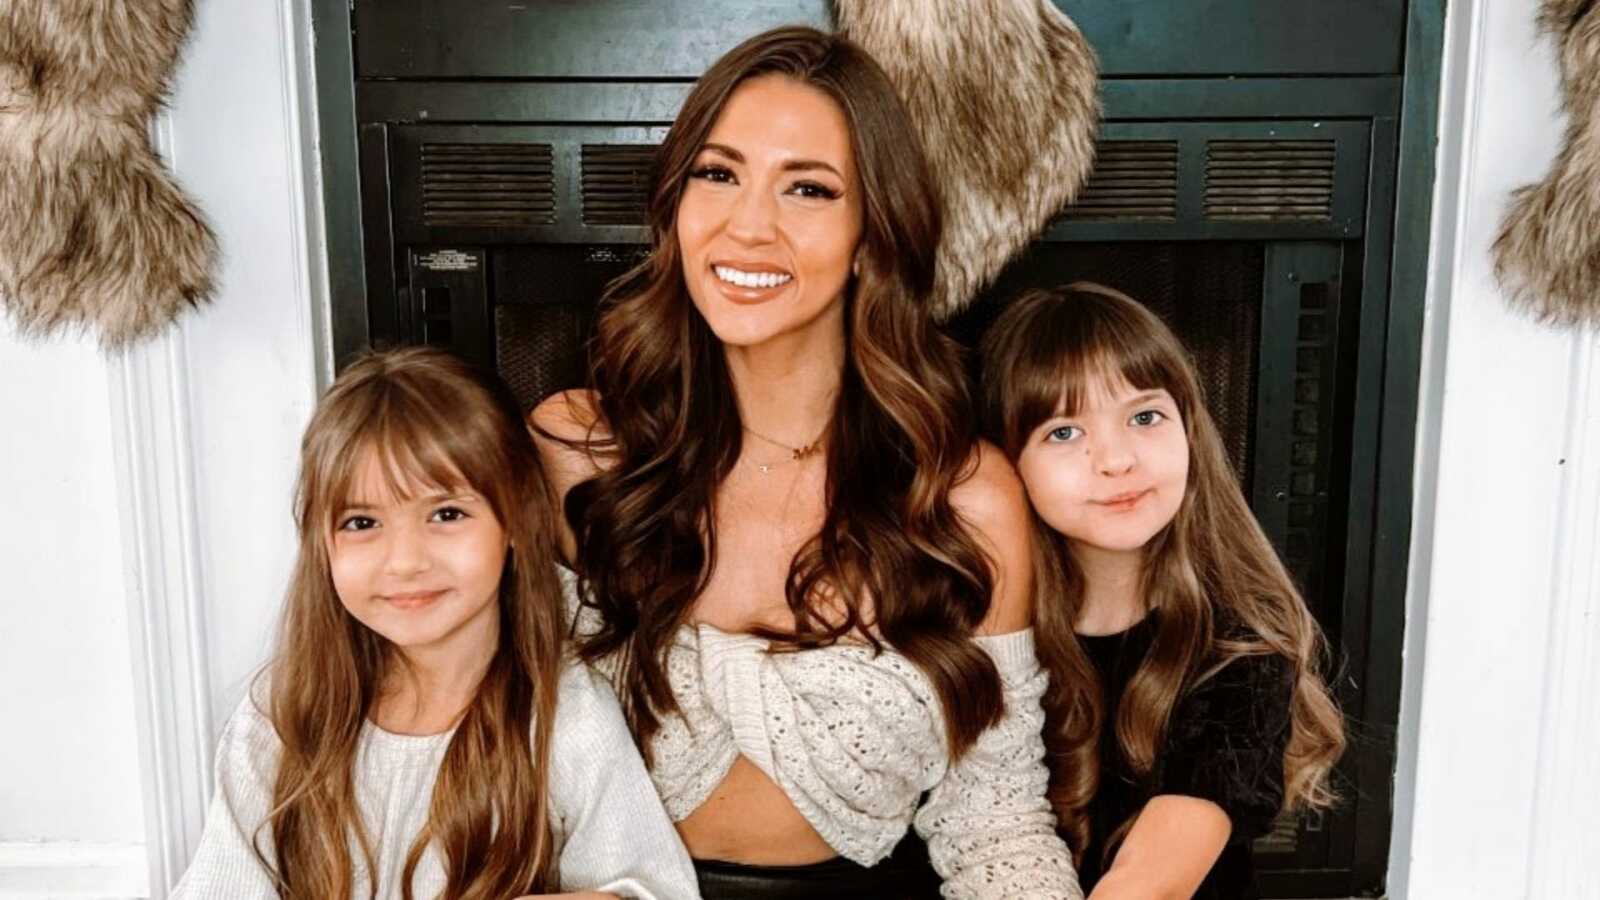 Single mom smiles for a photo with her two daughters